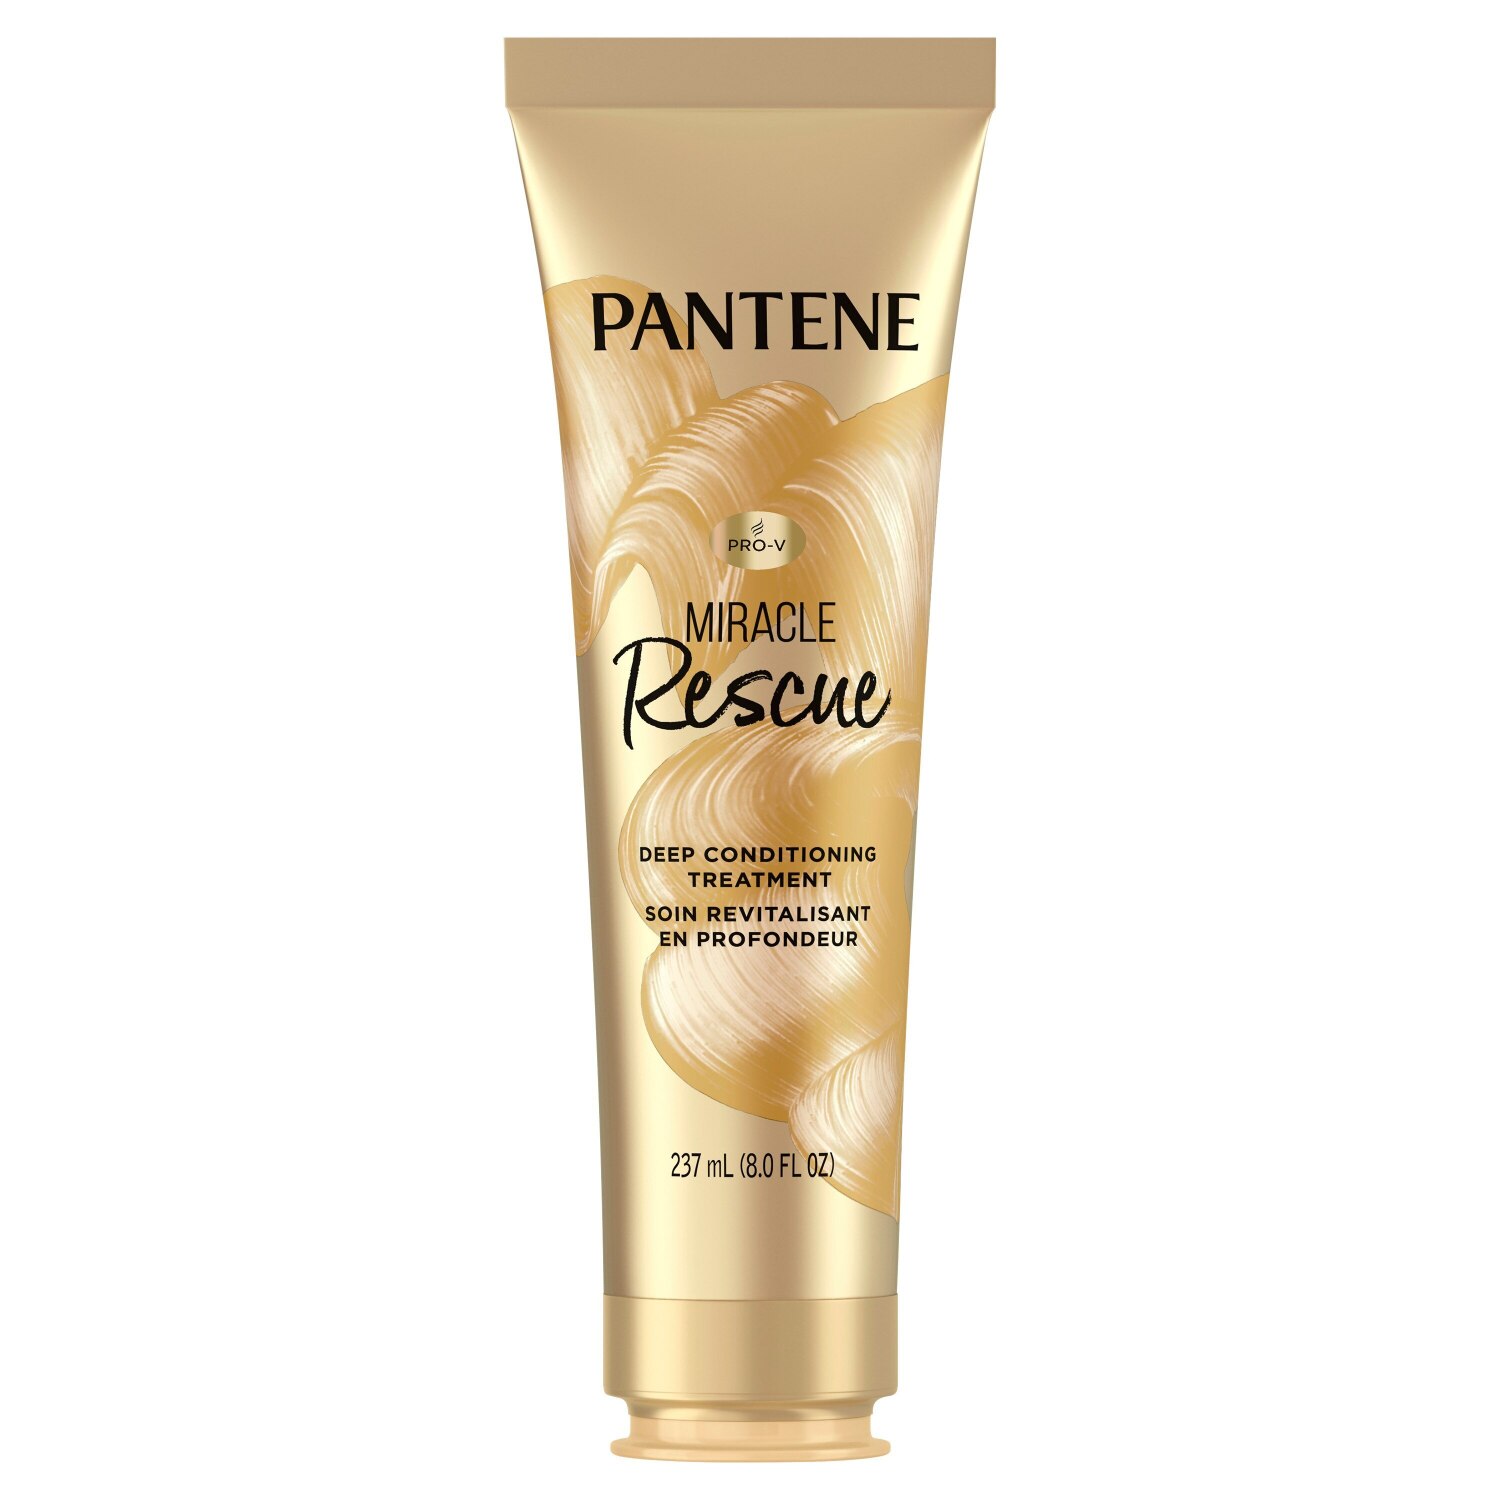  Pantene Miracle Rescue Deep Conditioning Hair Mask Treatment, 8 OZ 